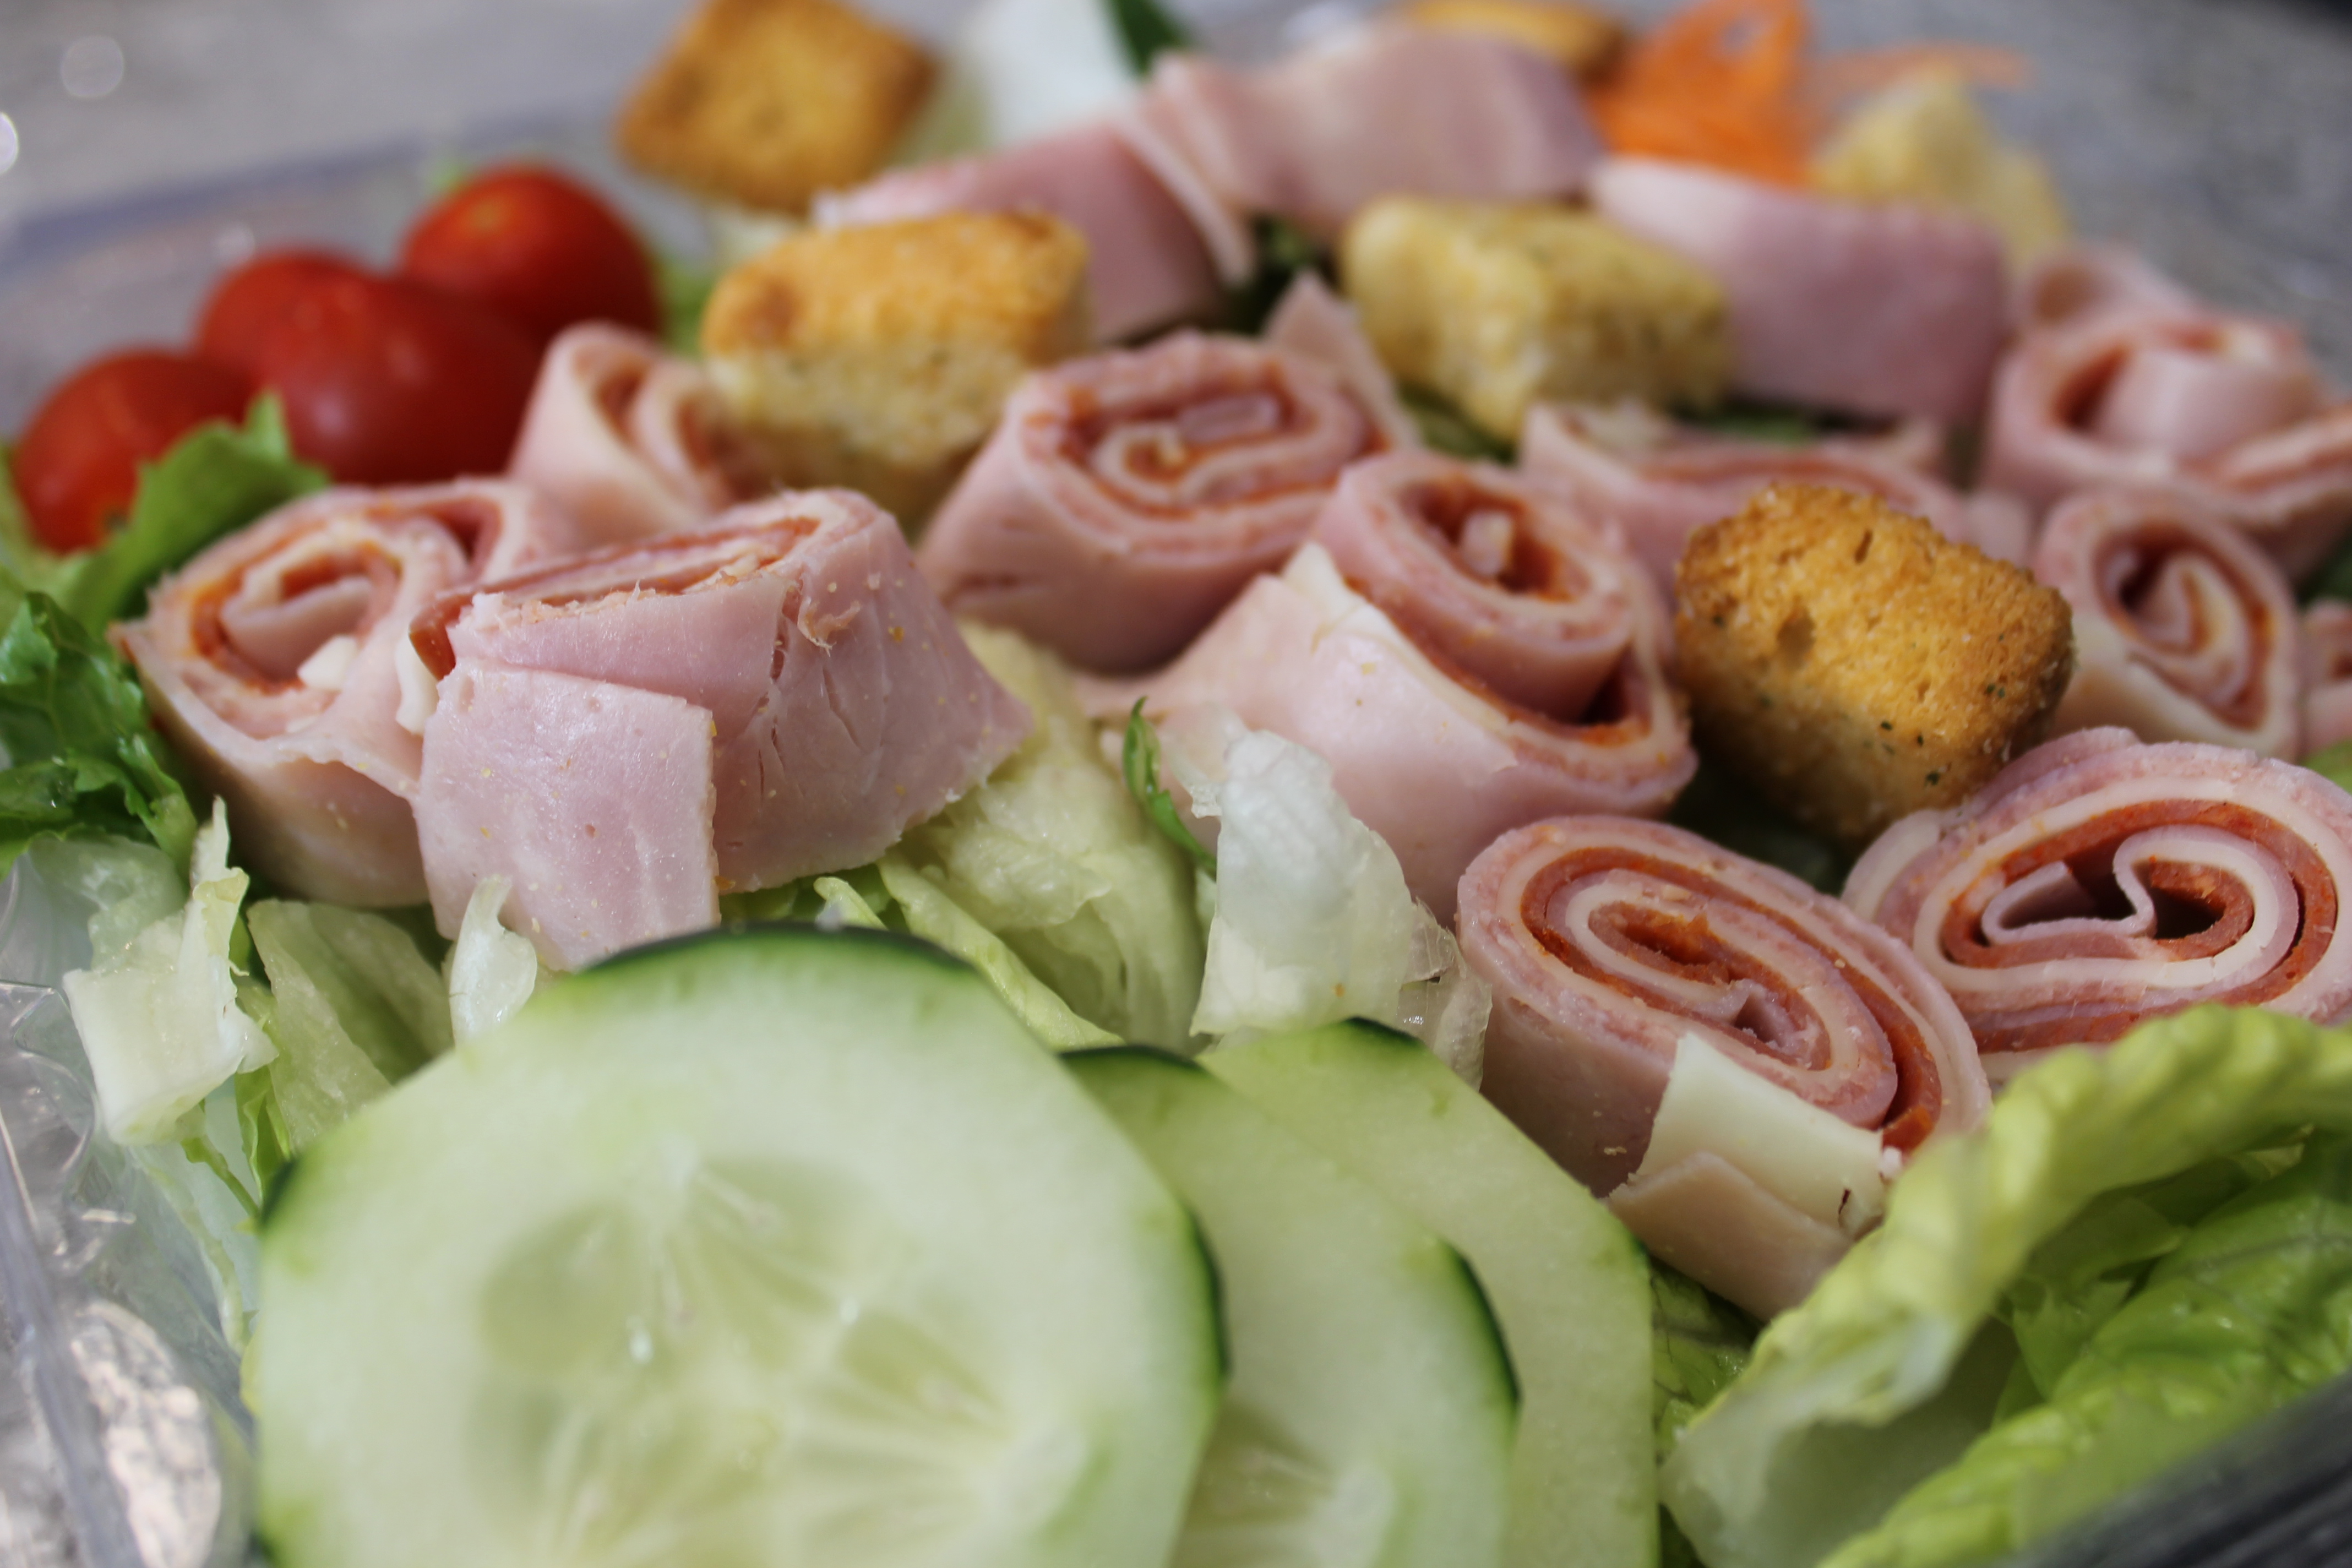 Antipasto Salad - Salad mix with shredded carrots, Cherry tomatoes, cucumbers, crouton and chunked provolone cheese topped with Deli ham, Capicola and Genoa salami.  Your choice of dressing